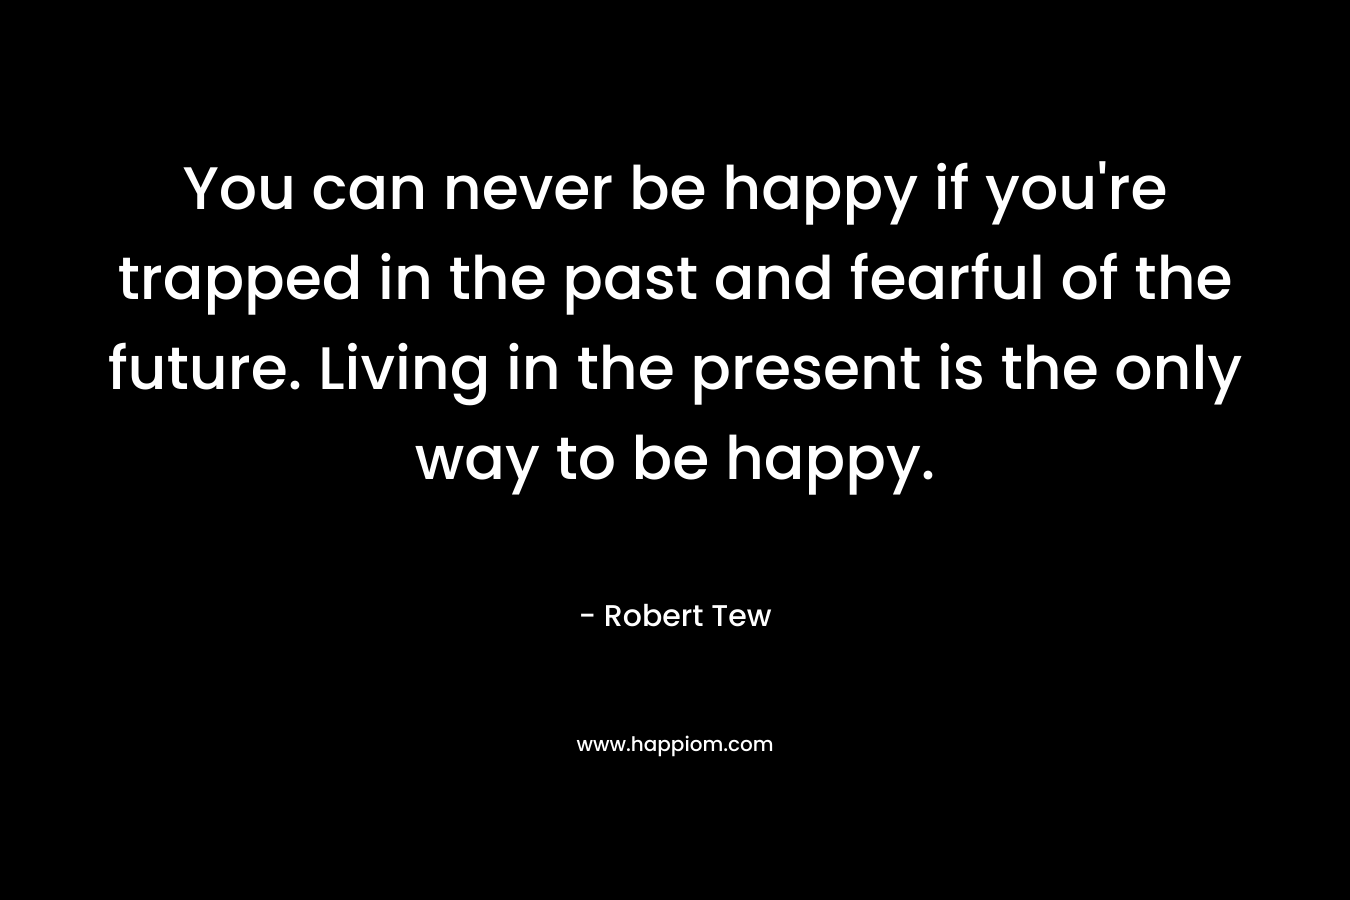 You can never be happy if you’re trapped in the past and fearful of the future. Living in the present is the only way to be happy. – Robert Tew